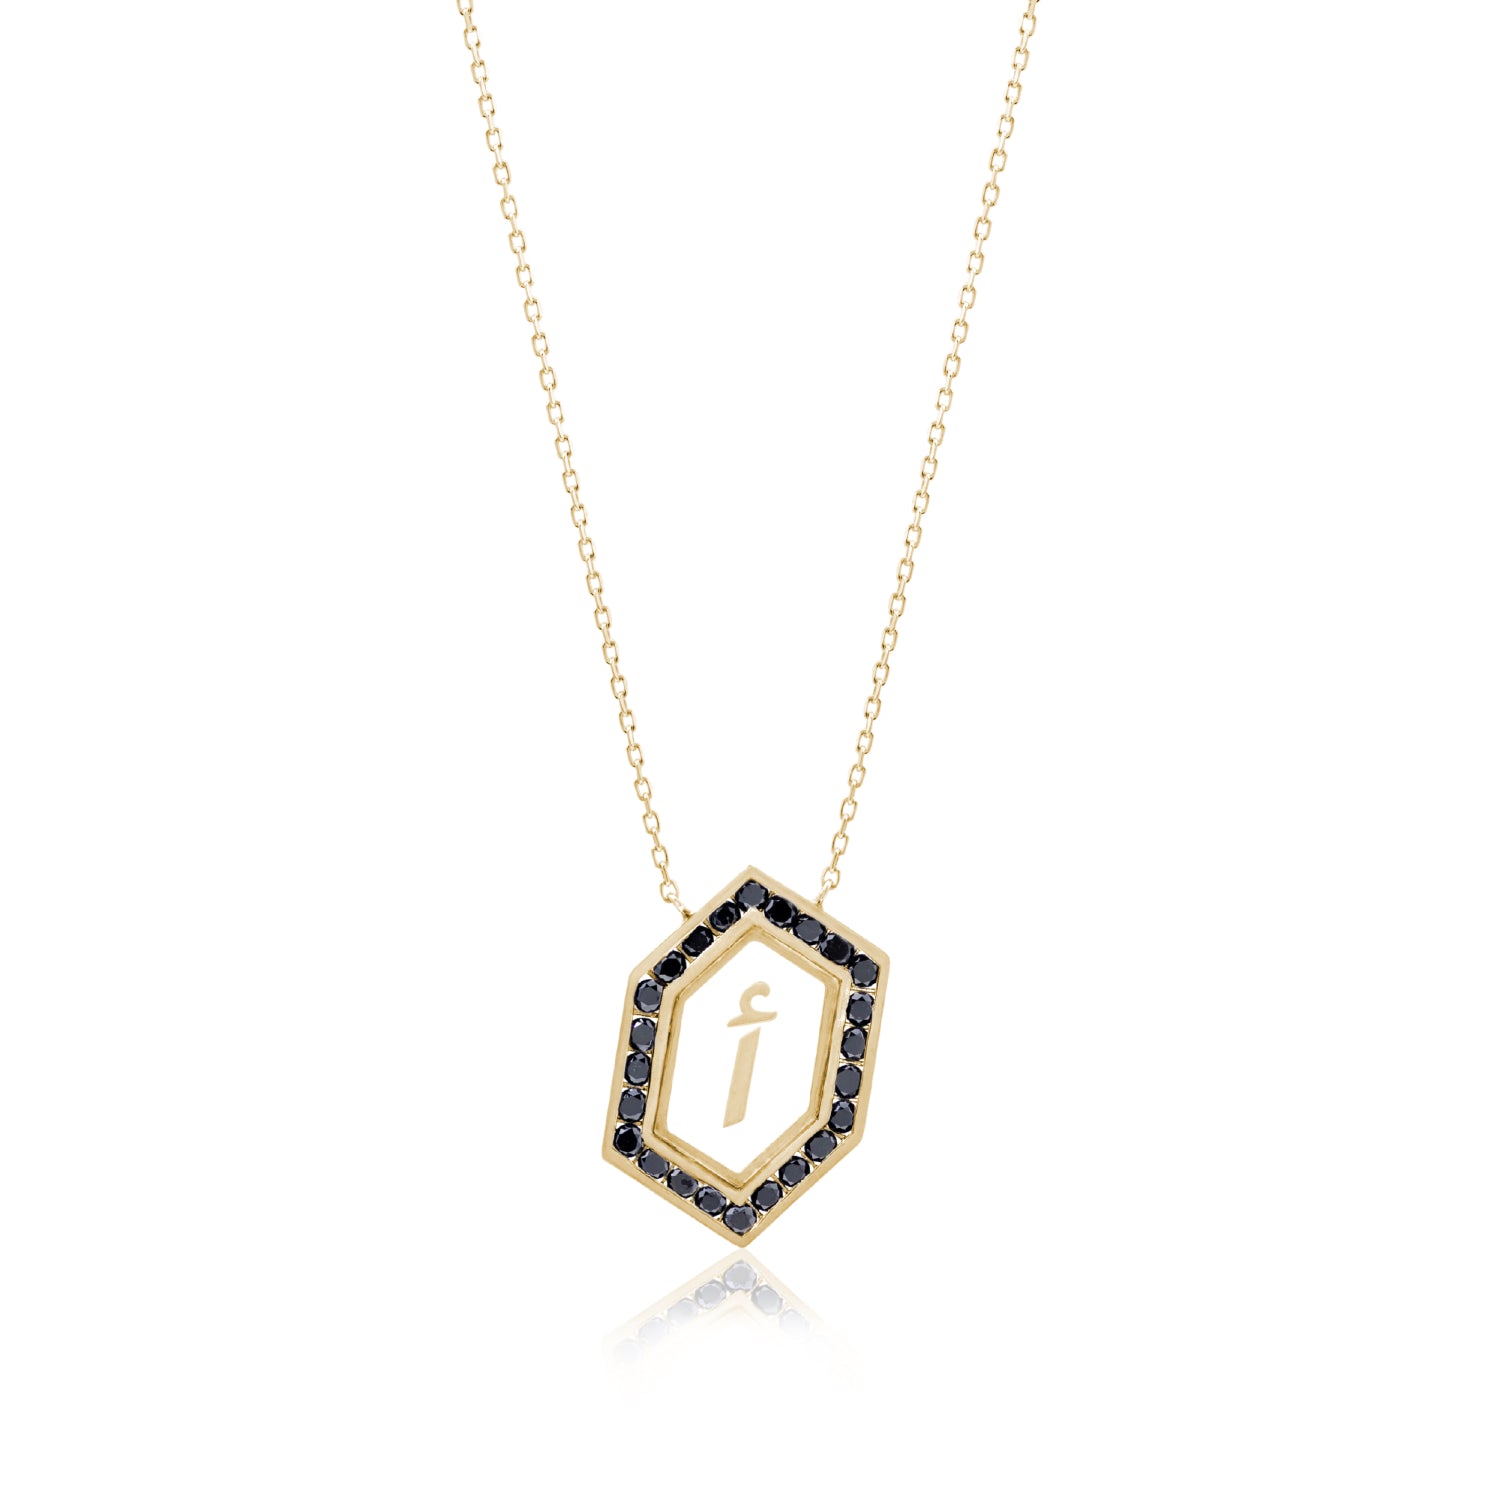 Qamoos 1.0 Letter أ Black Diamond Necklace in Yellow Gold